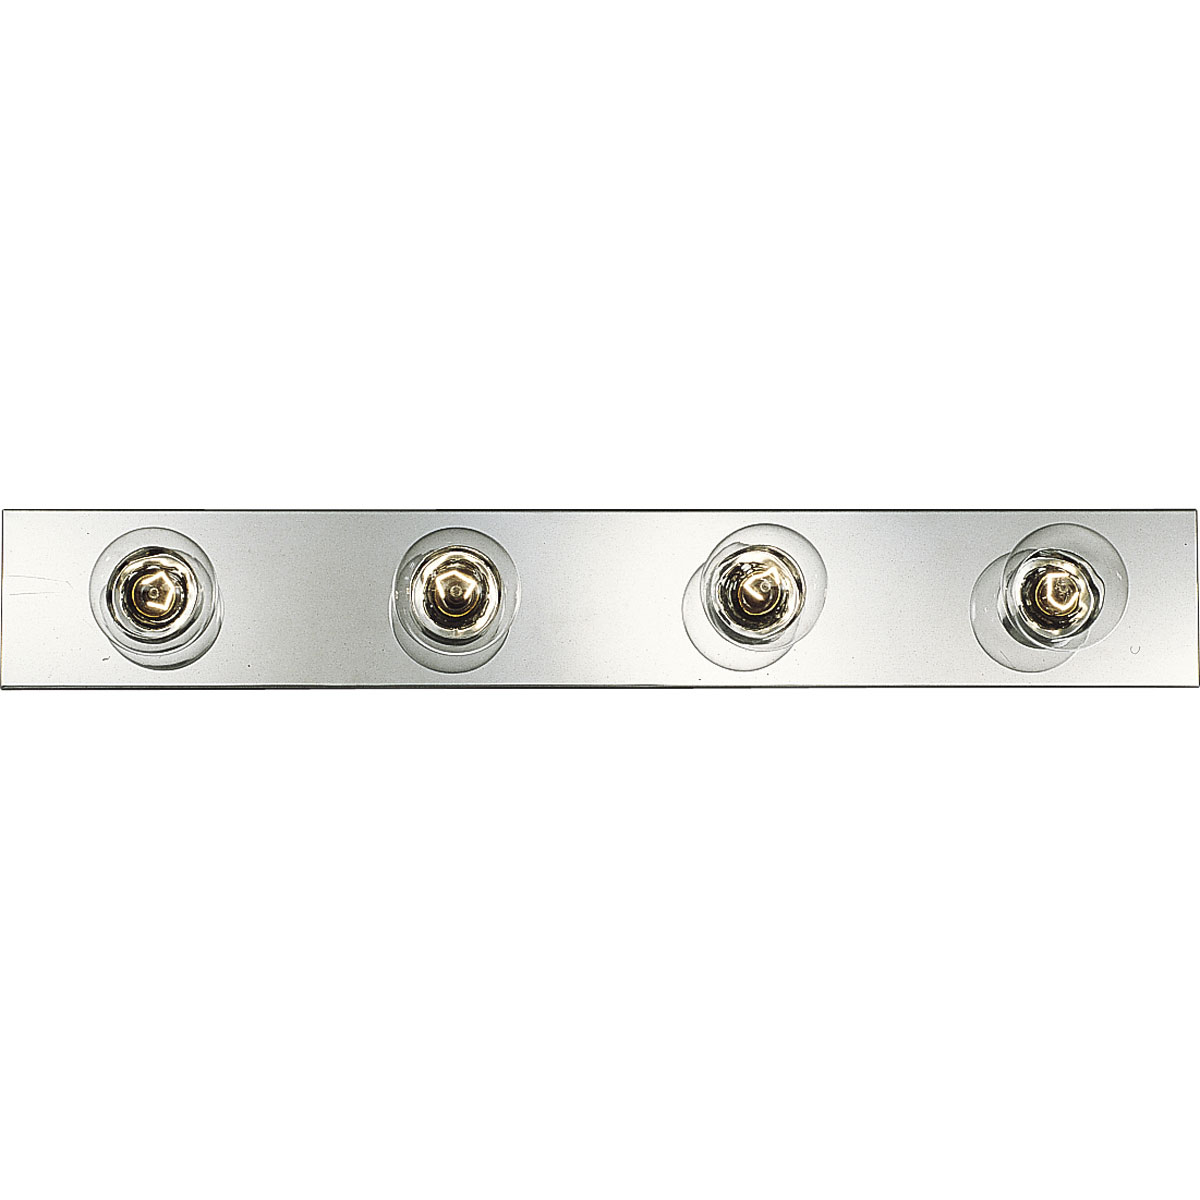 Basic Broadway Lighting strips use fewer lamps to lower the overall wattage per strip. This four-light bath strip with sockets on 7-1/2 inch centers gives an even spread of illumination. UL listed for ceiling mounting with 25w maximum lamps. Complete with a brilliant metallic finish.